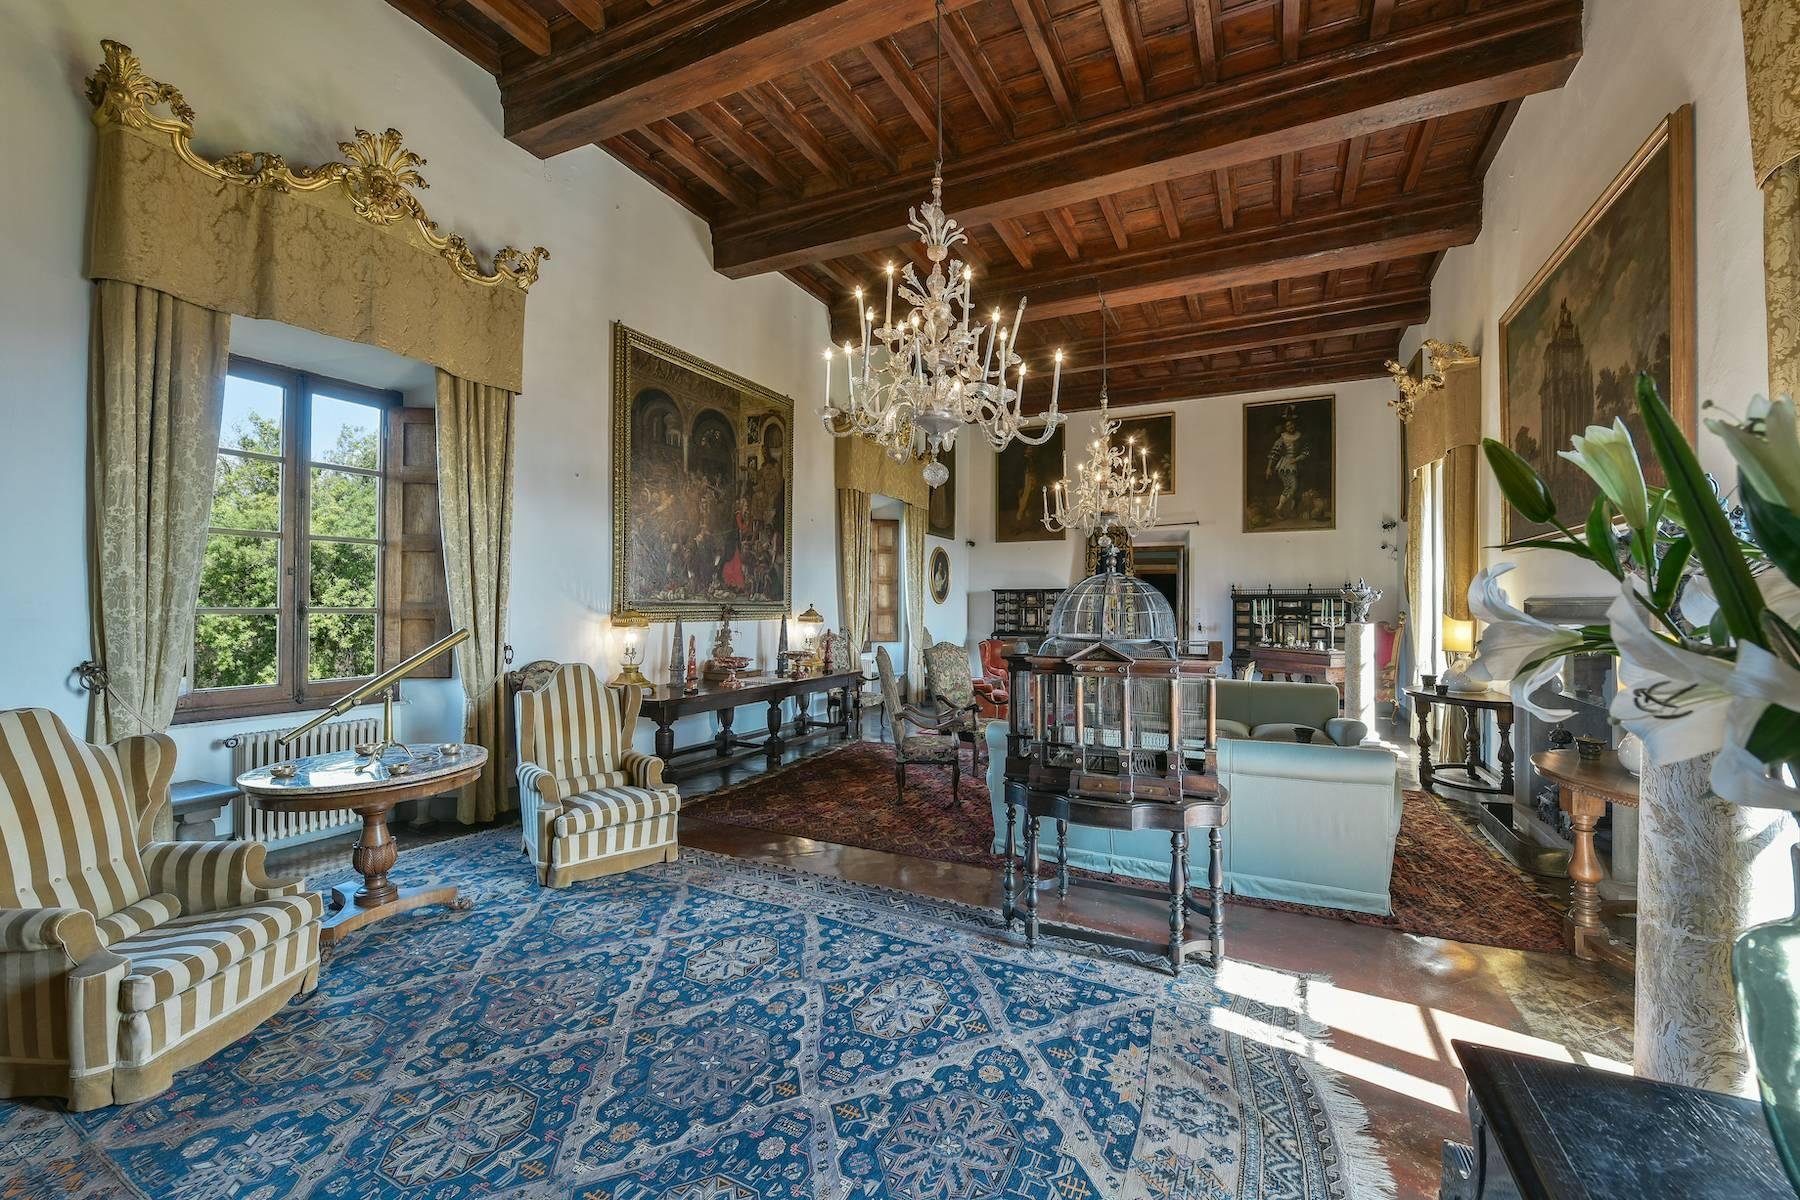 Francis York  Tuscan Villa Owned by Italian Aristocracy Available to Book as a Luxury Villa Rental 11.jpg